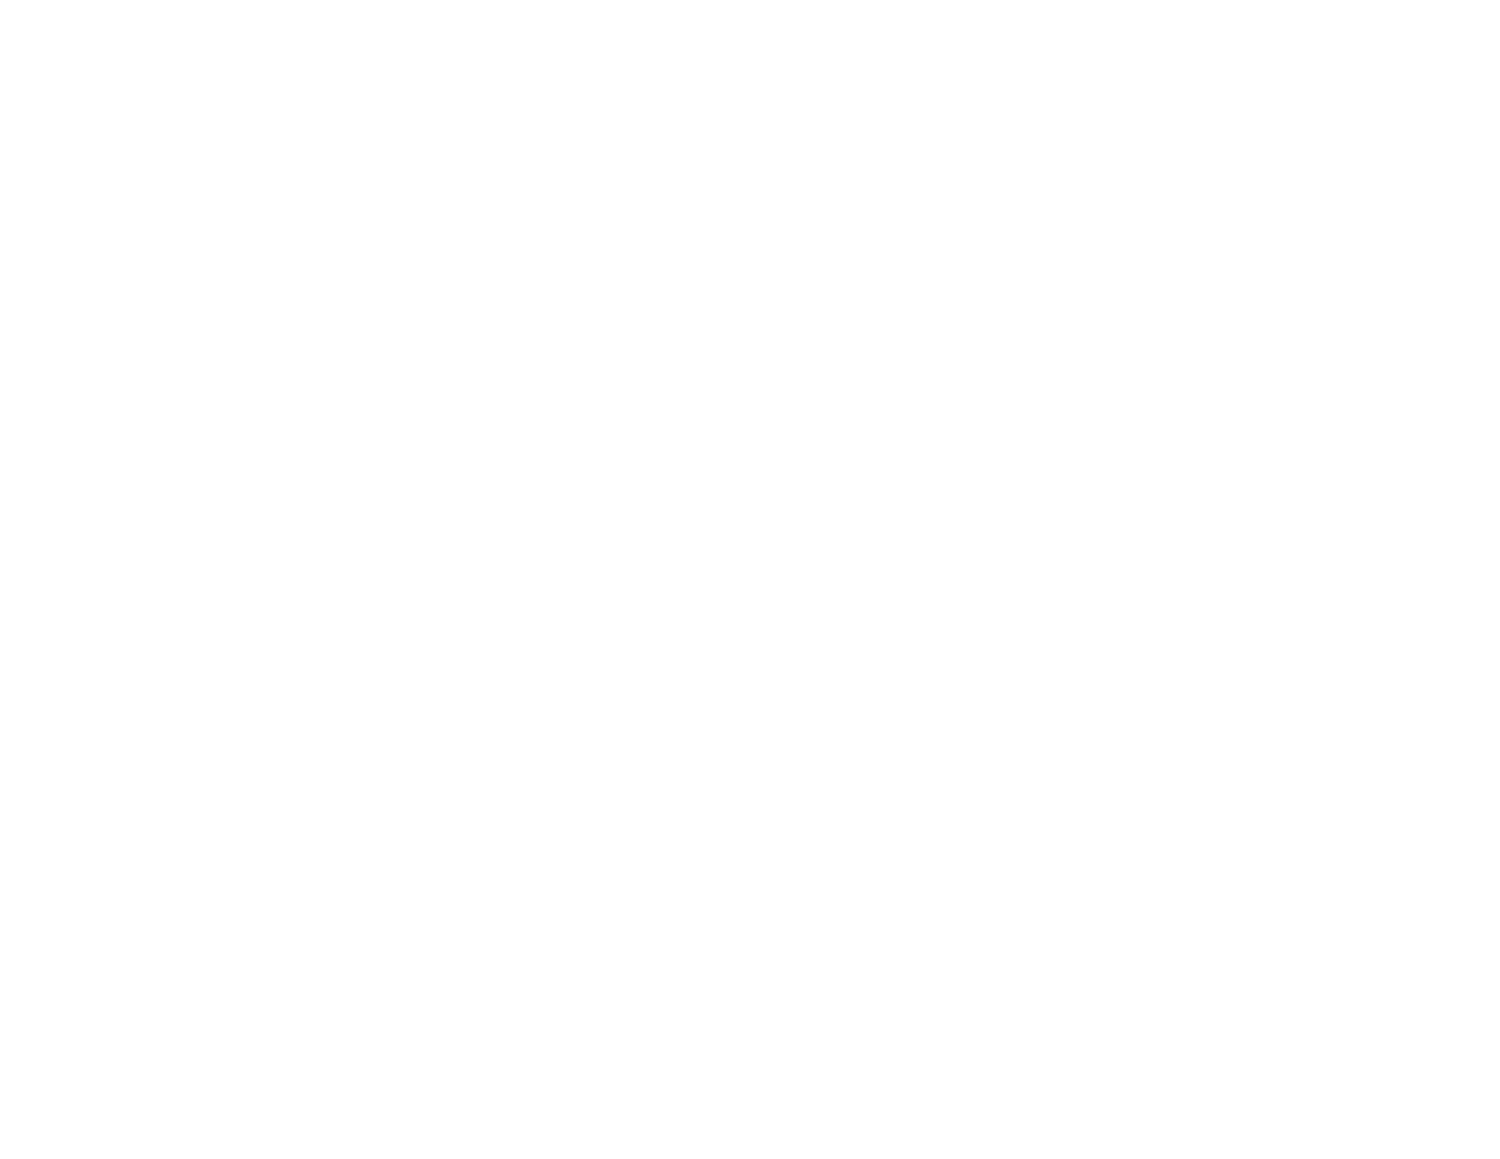 Allow to flow